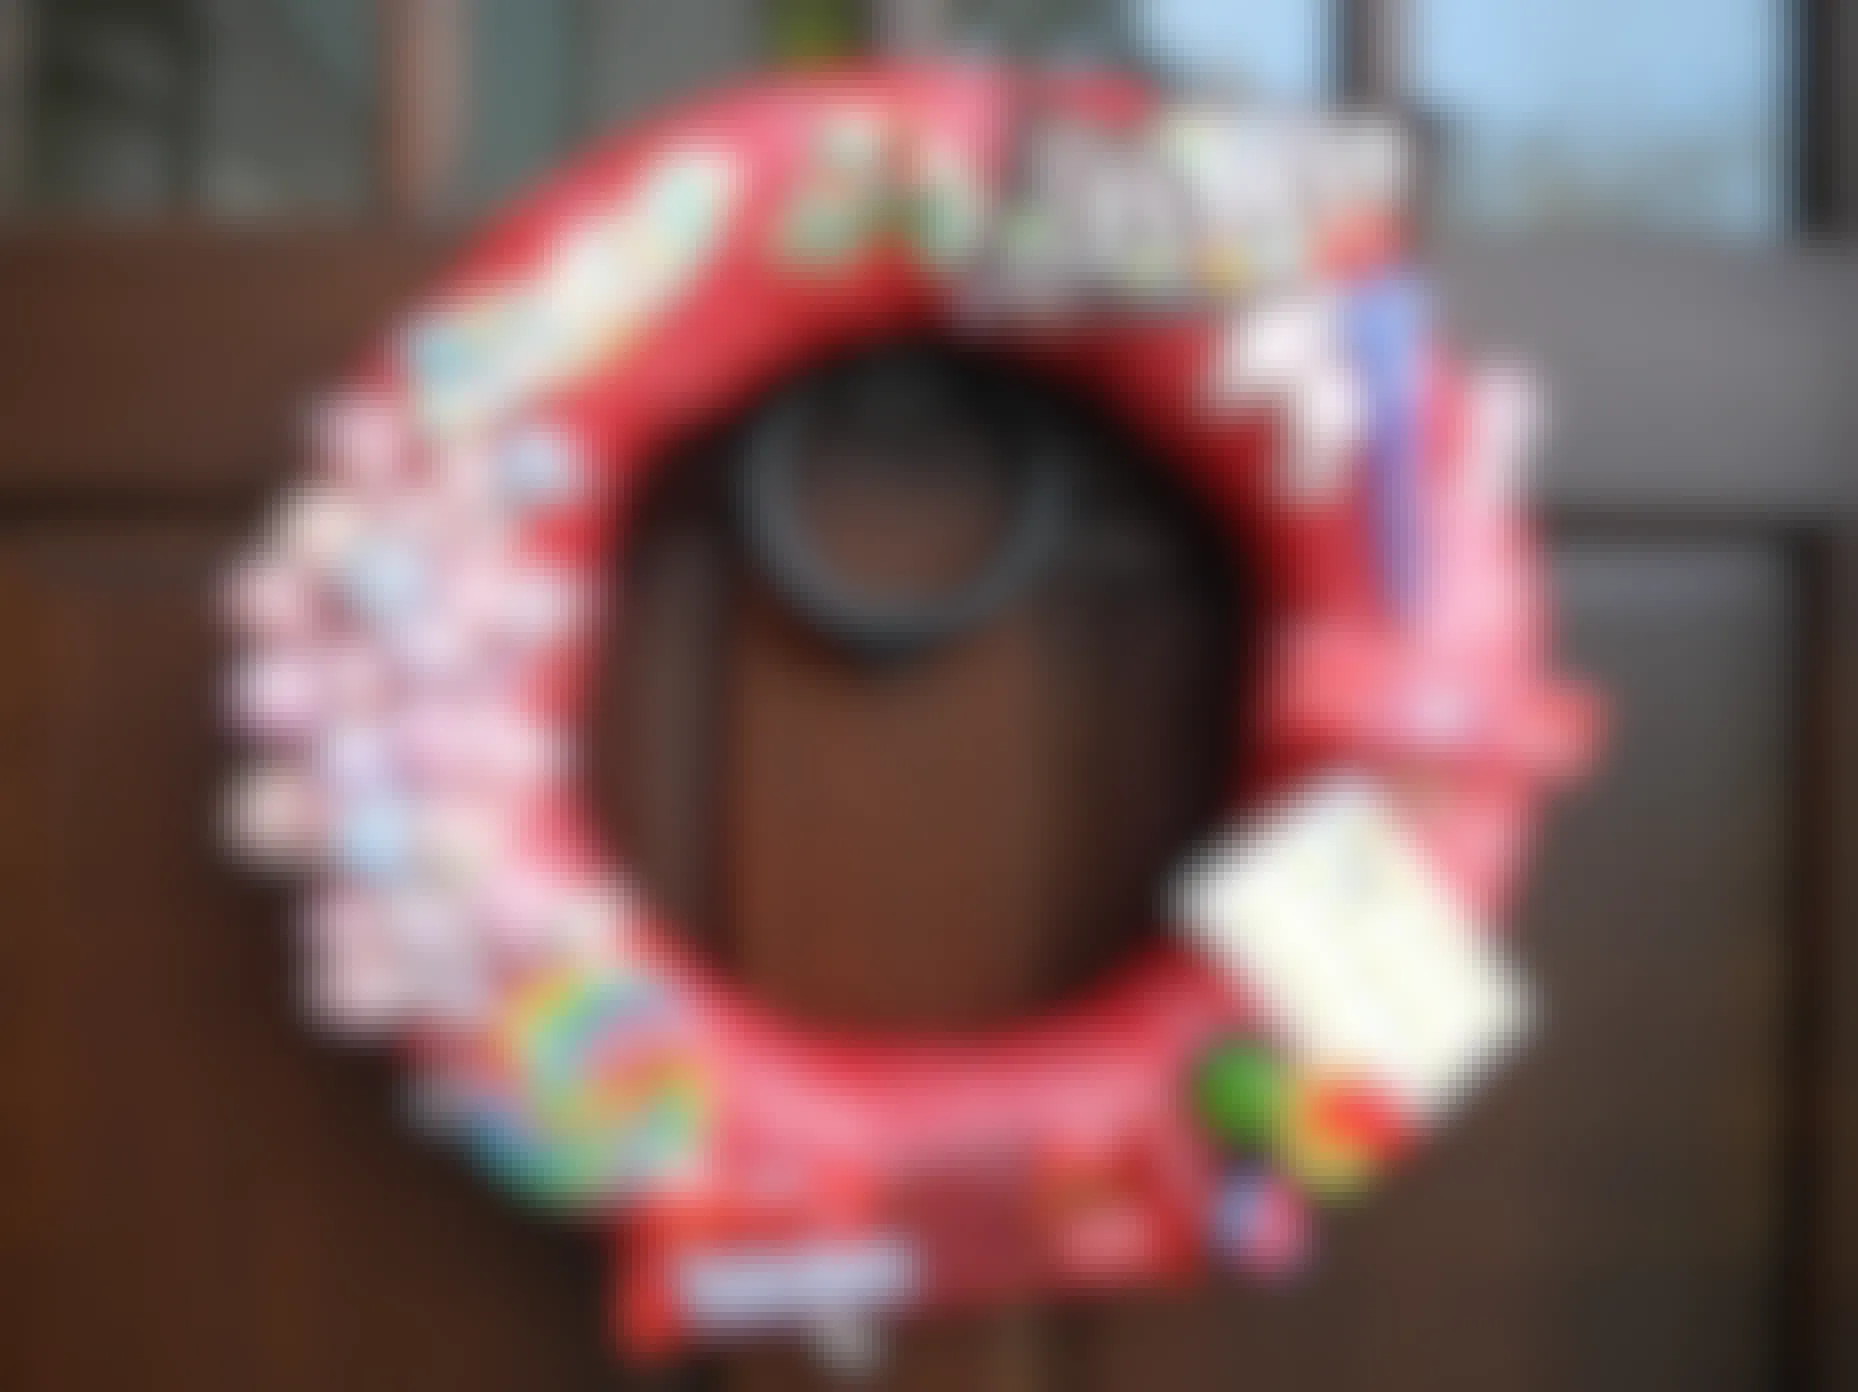 A Christmas door wreath decorated in Halloween candy.